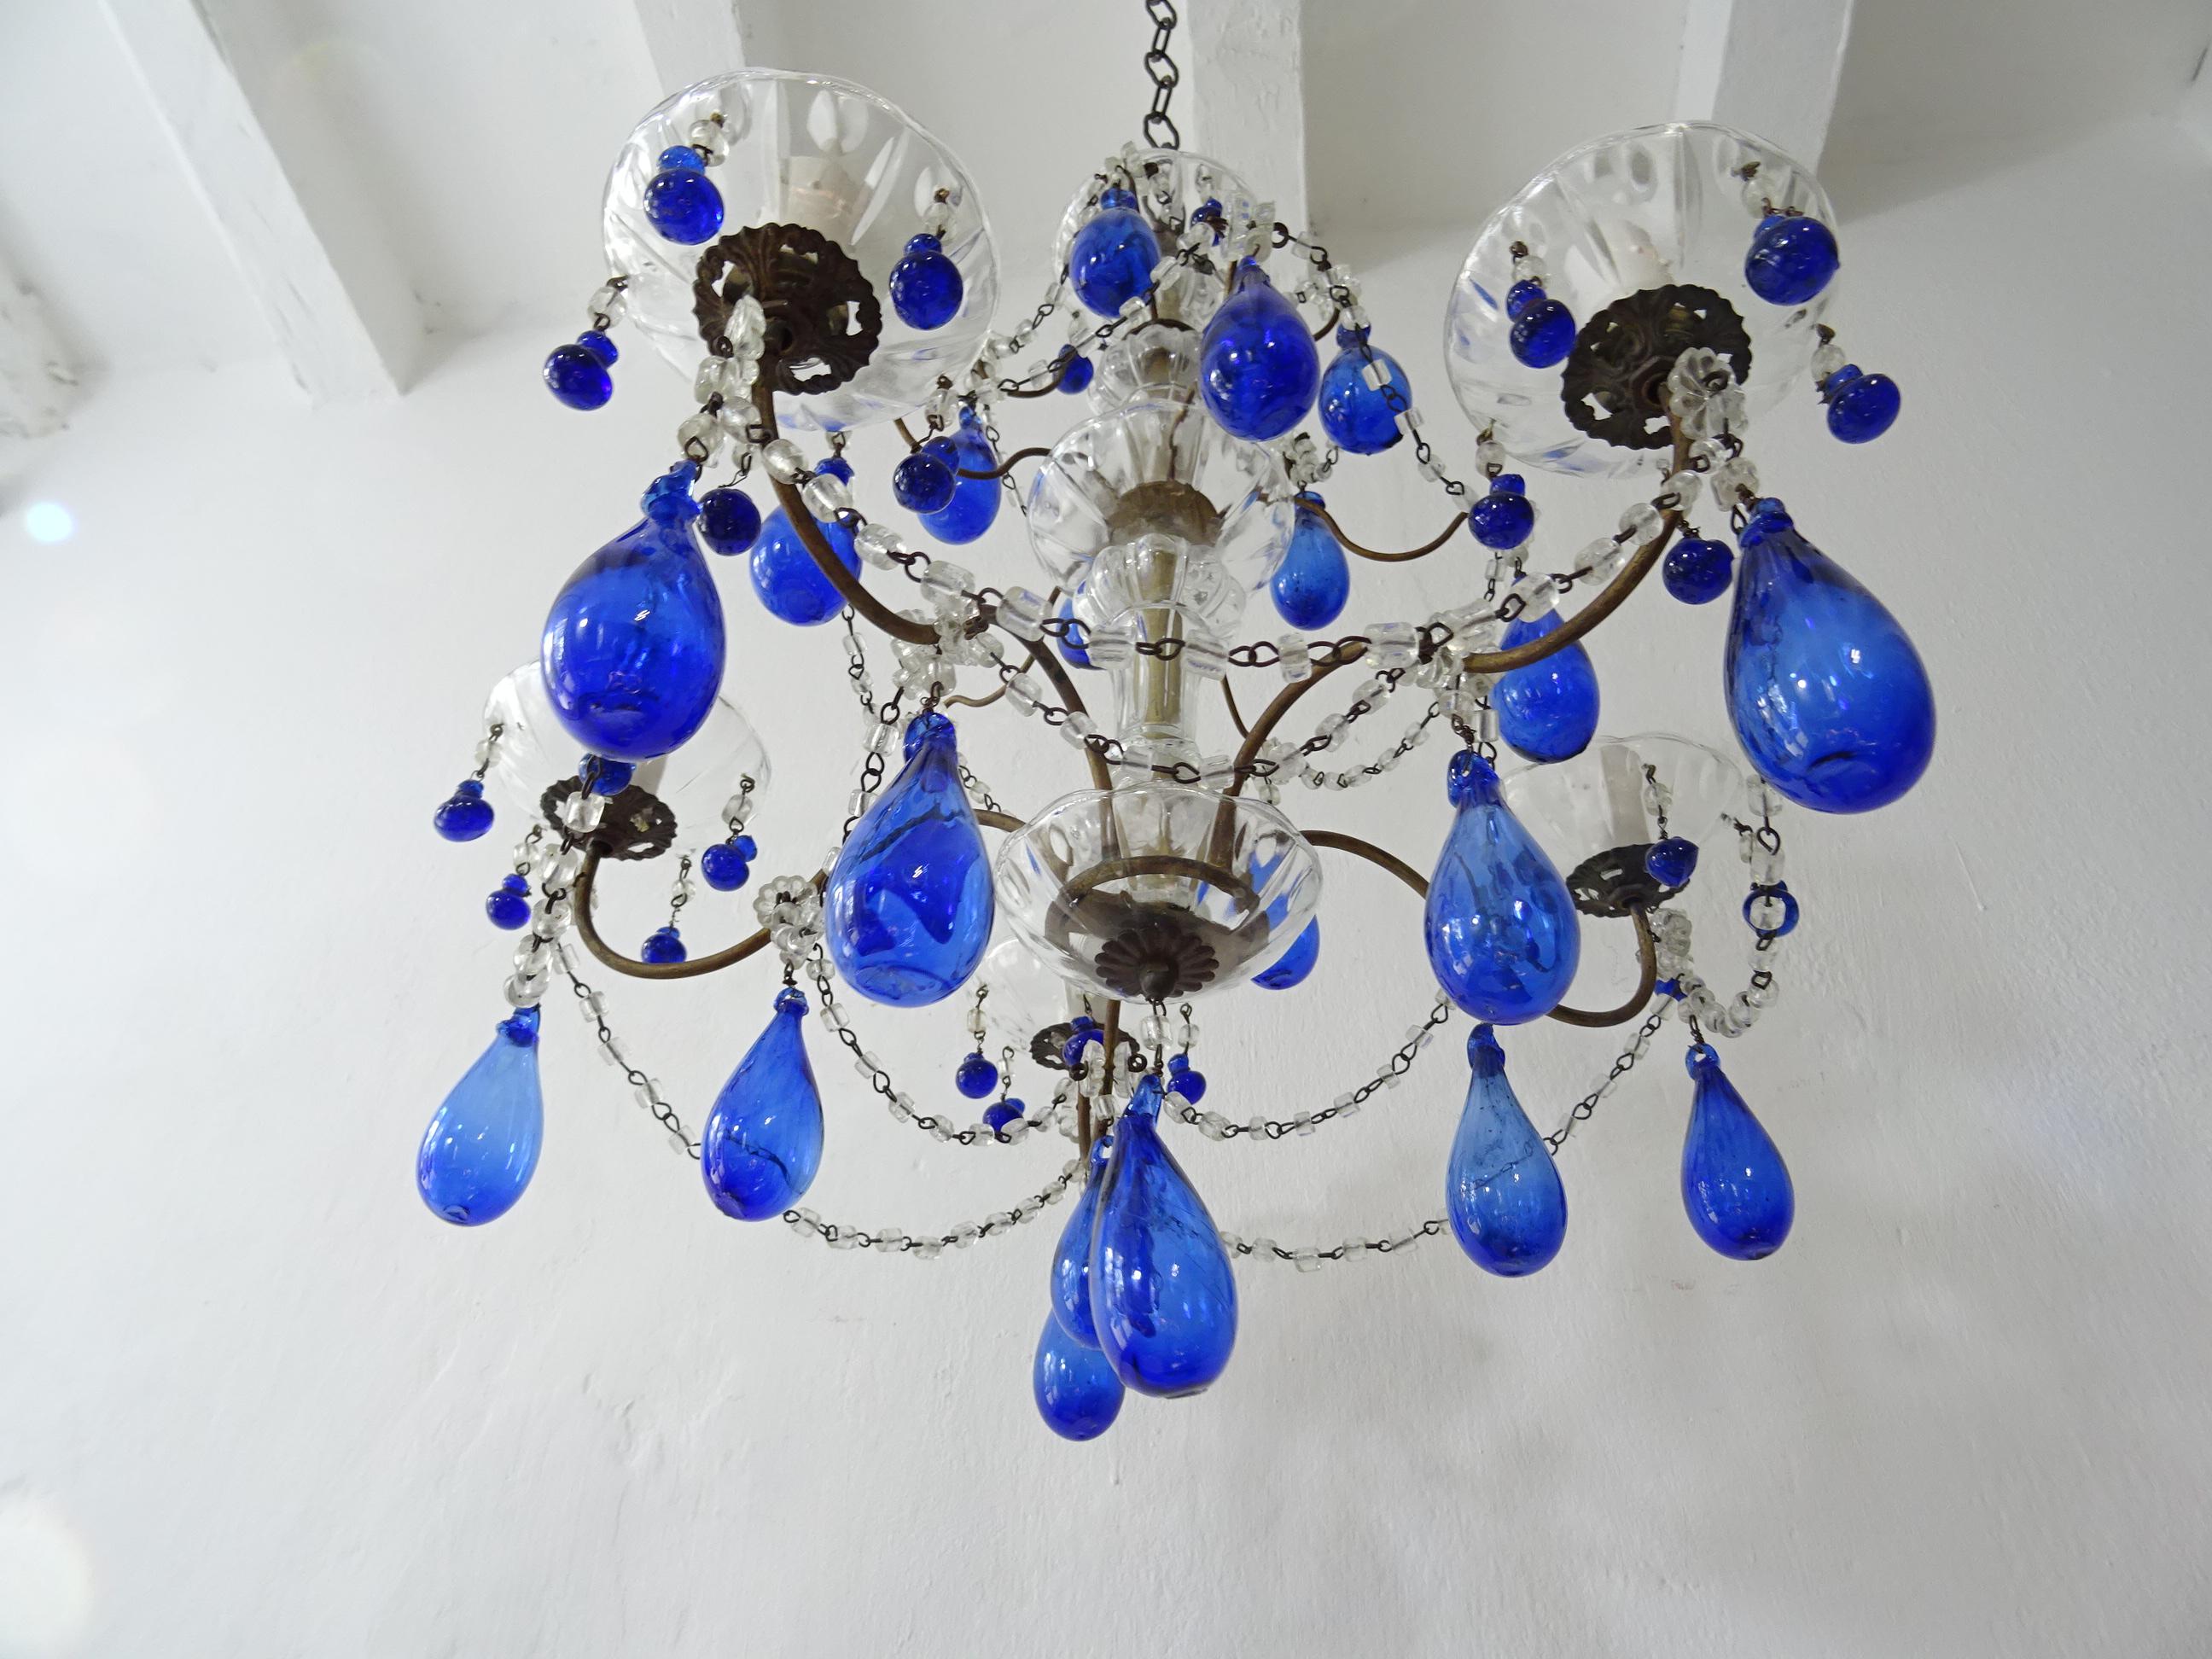 Murano Glass Italian Mouth Blown Cobalt Blue Murano Drops Crystal Swags Chandelier, c 1920